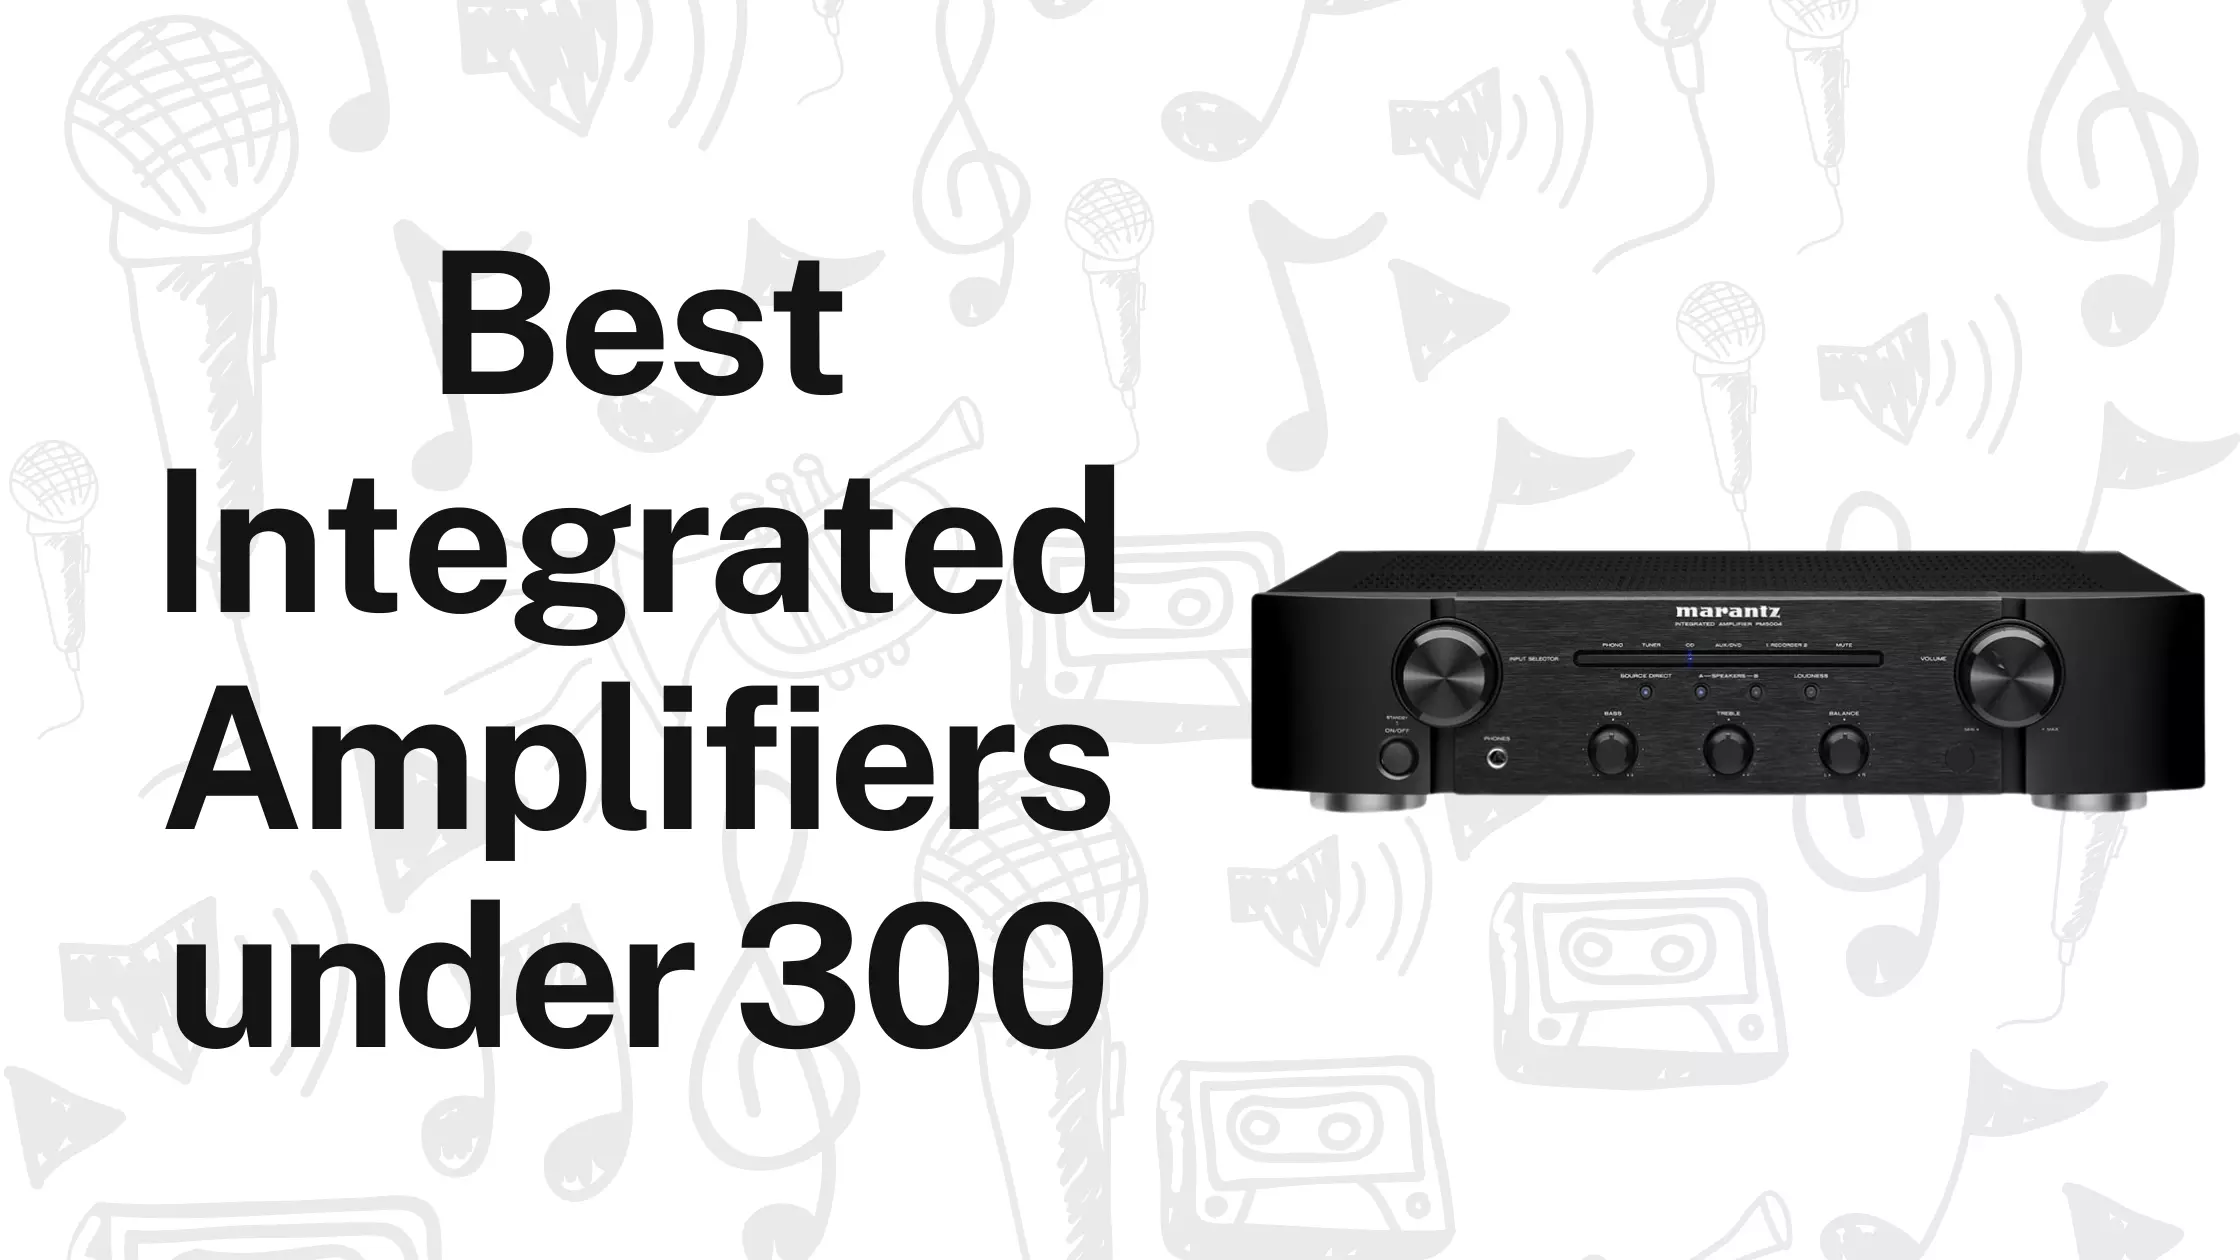 8 Best Integrated Amplifiers Under $300 - Review and Buying Guide